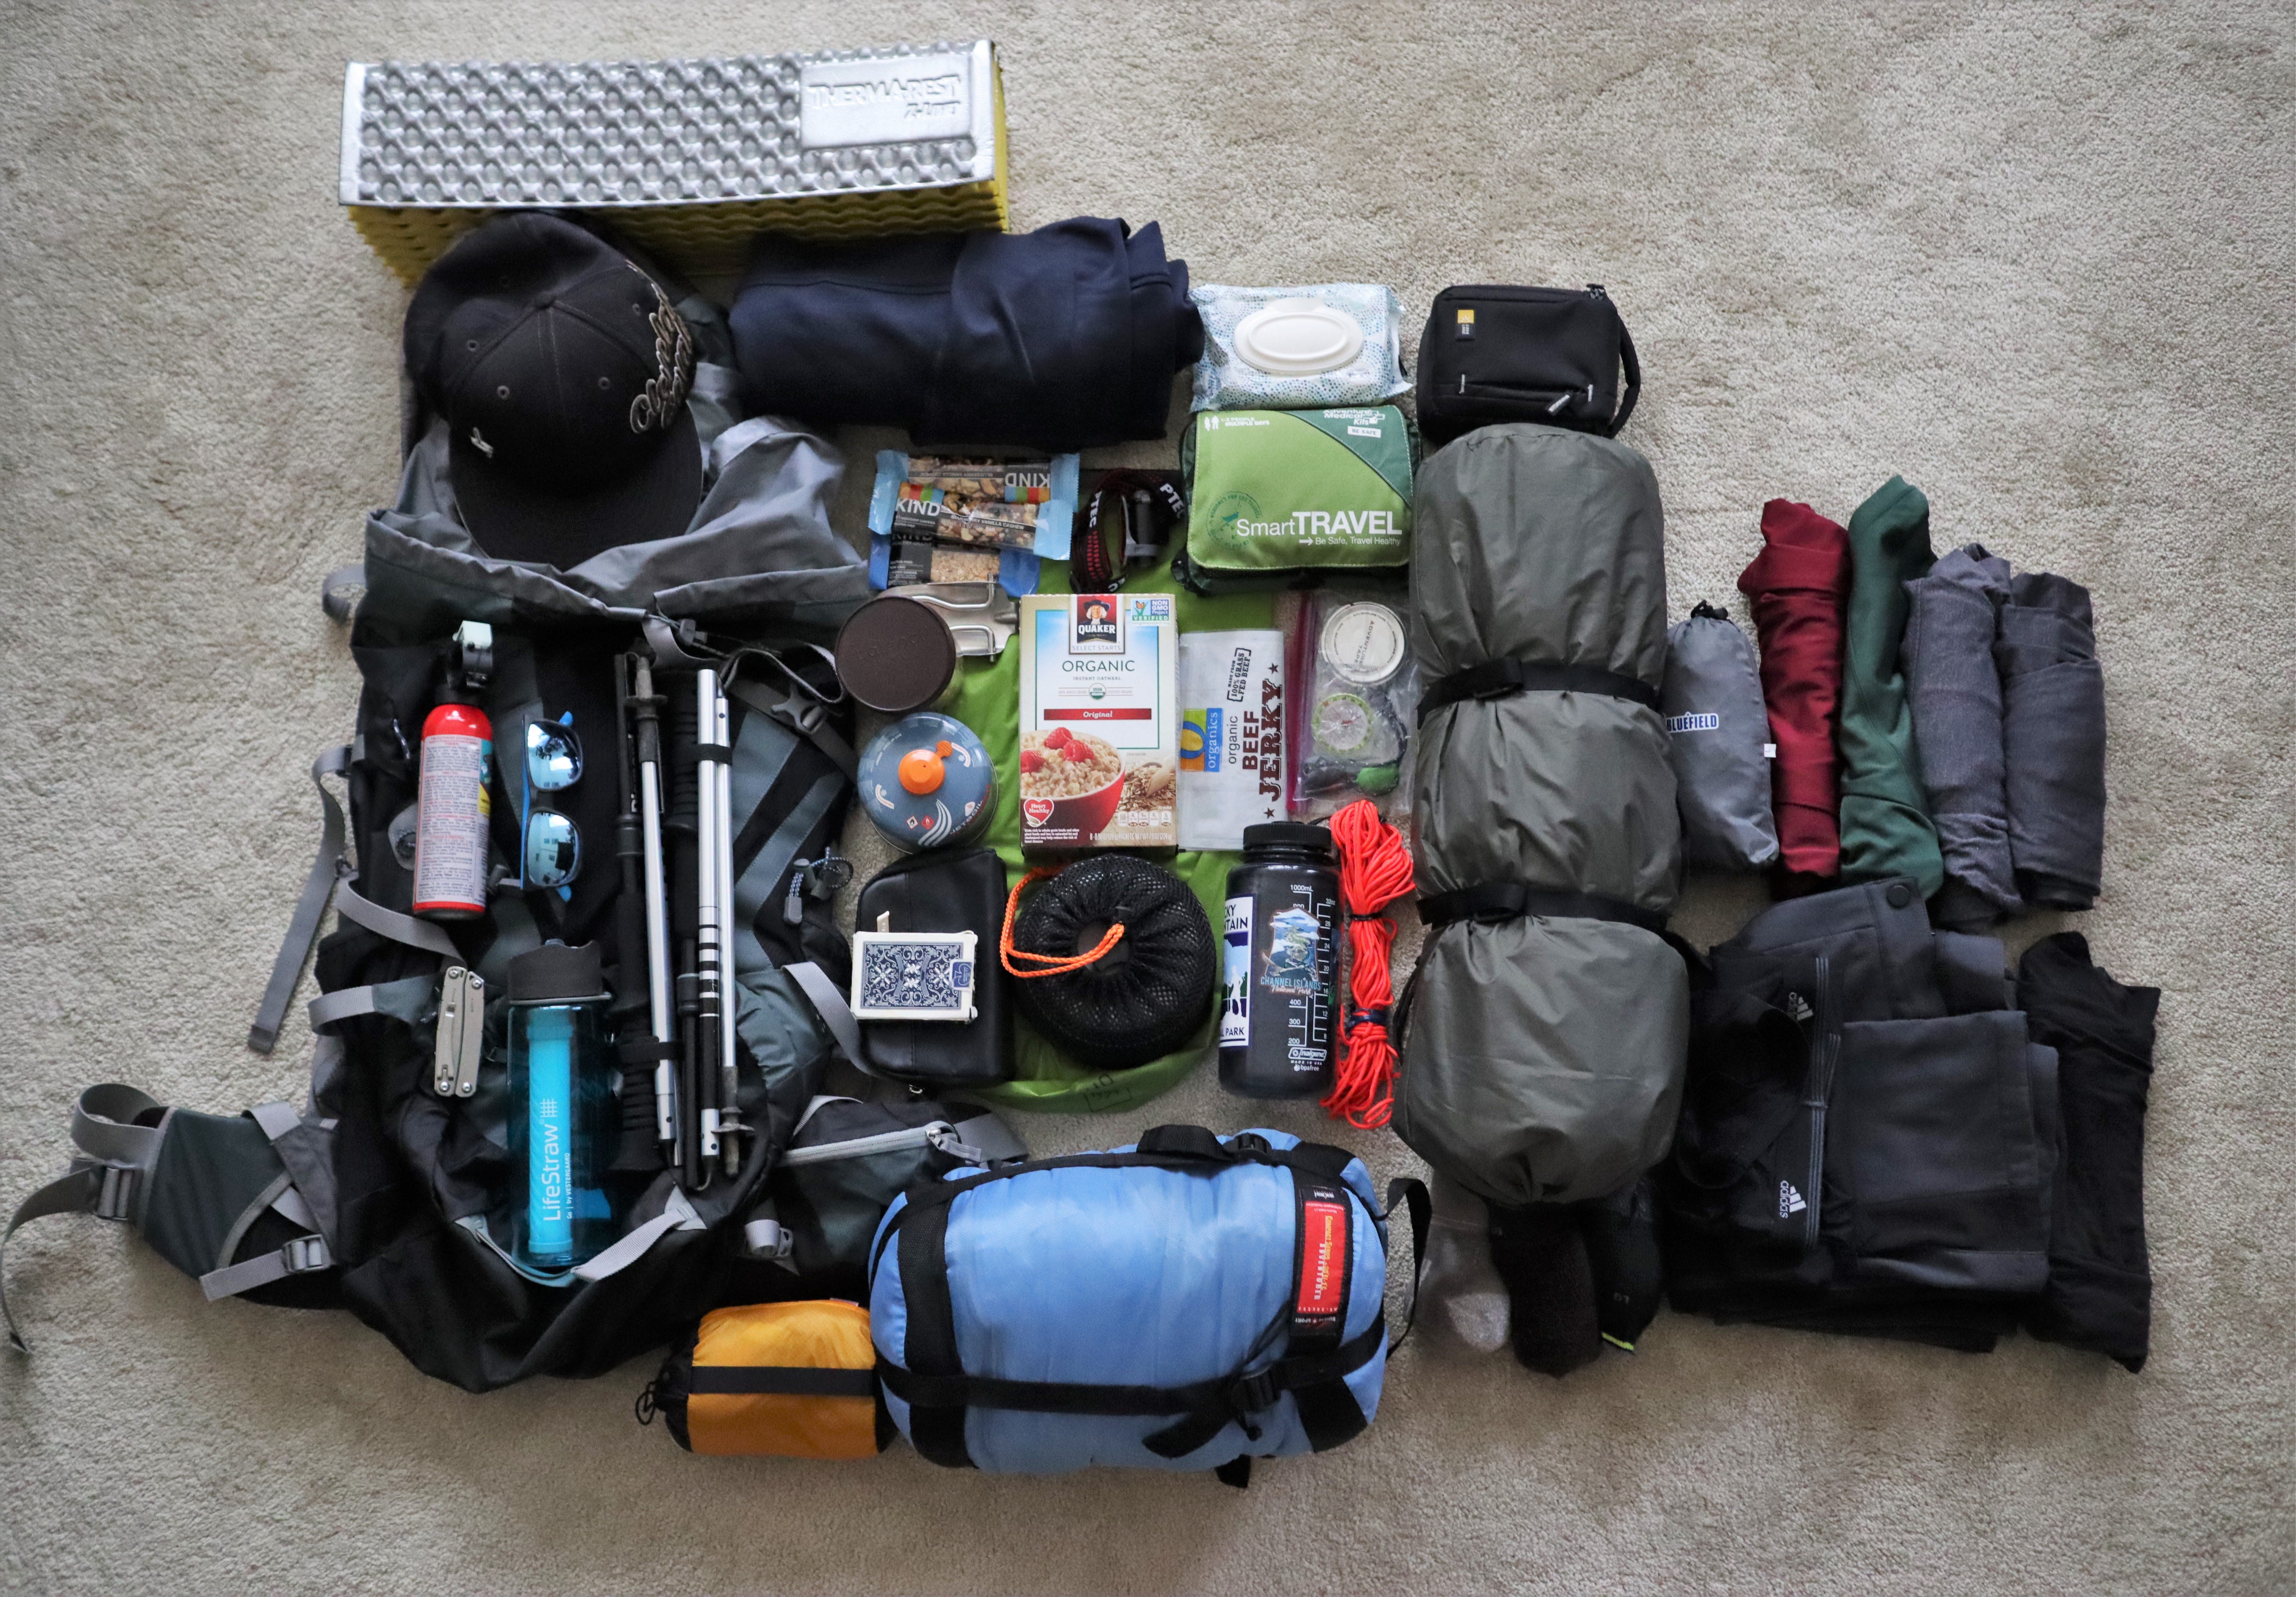 The Definitive Guide that You Never Wanted: Packing Your Backpack, by  Geoff